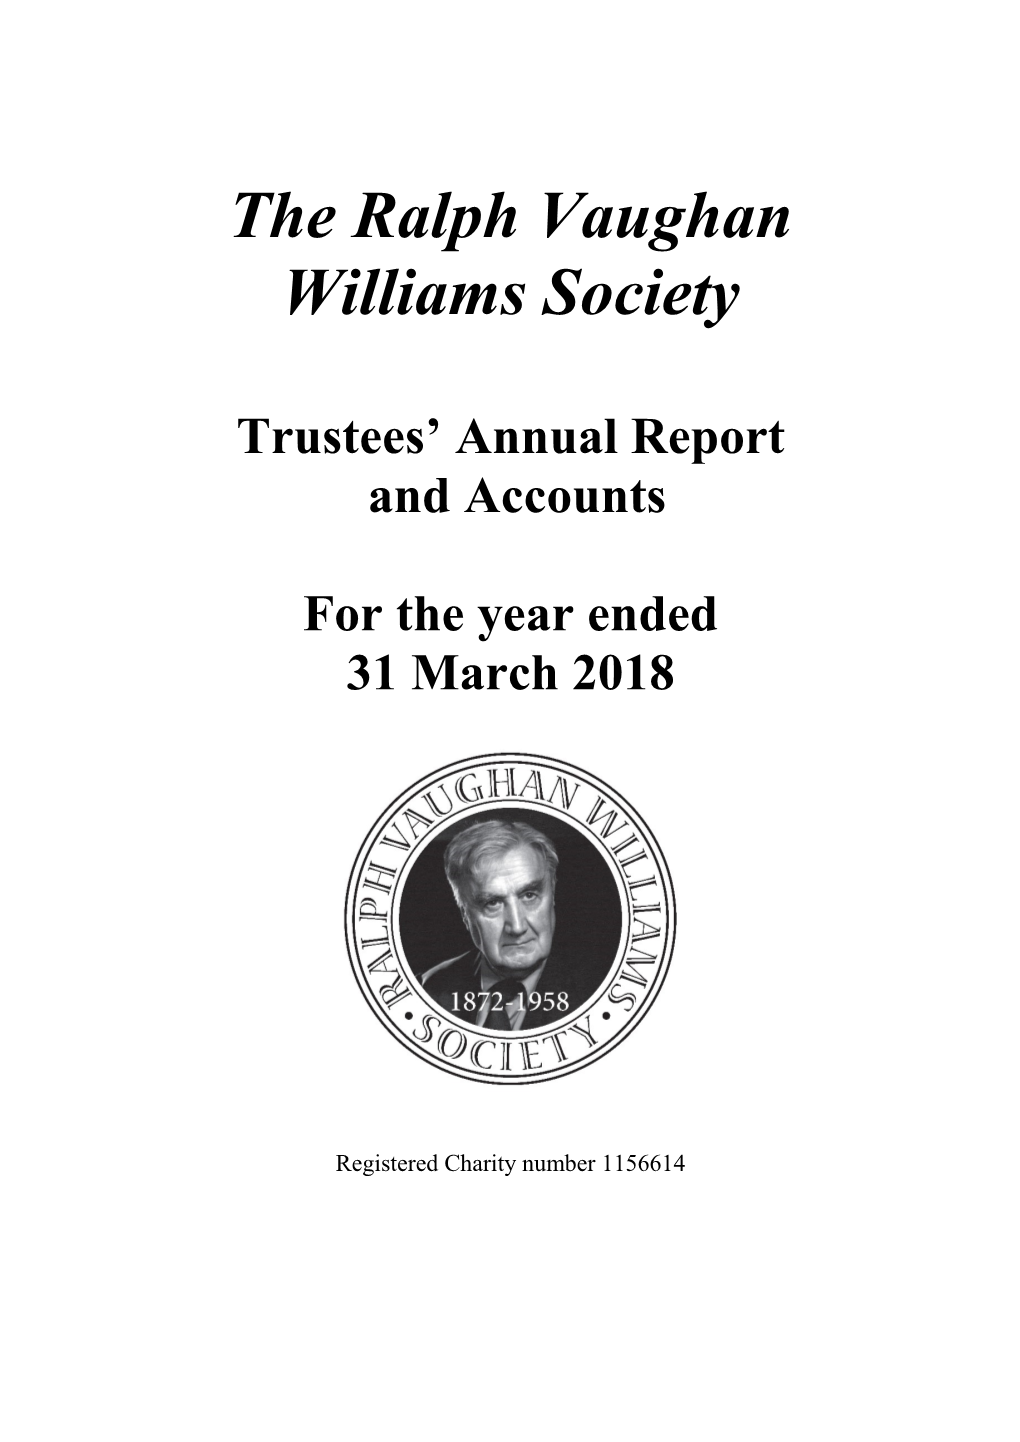 The Ralph Vaughan Williams Society Trustees' Report